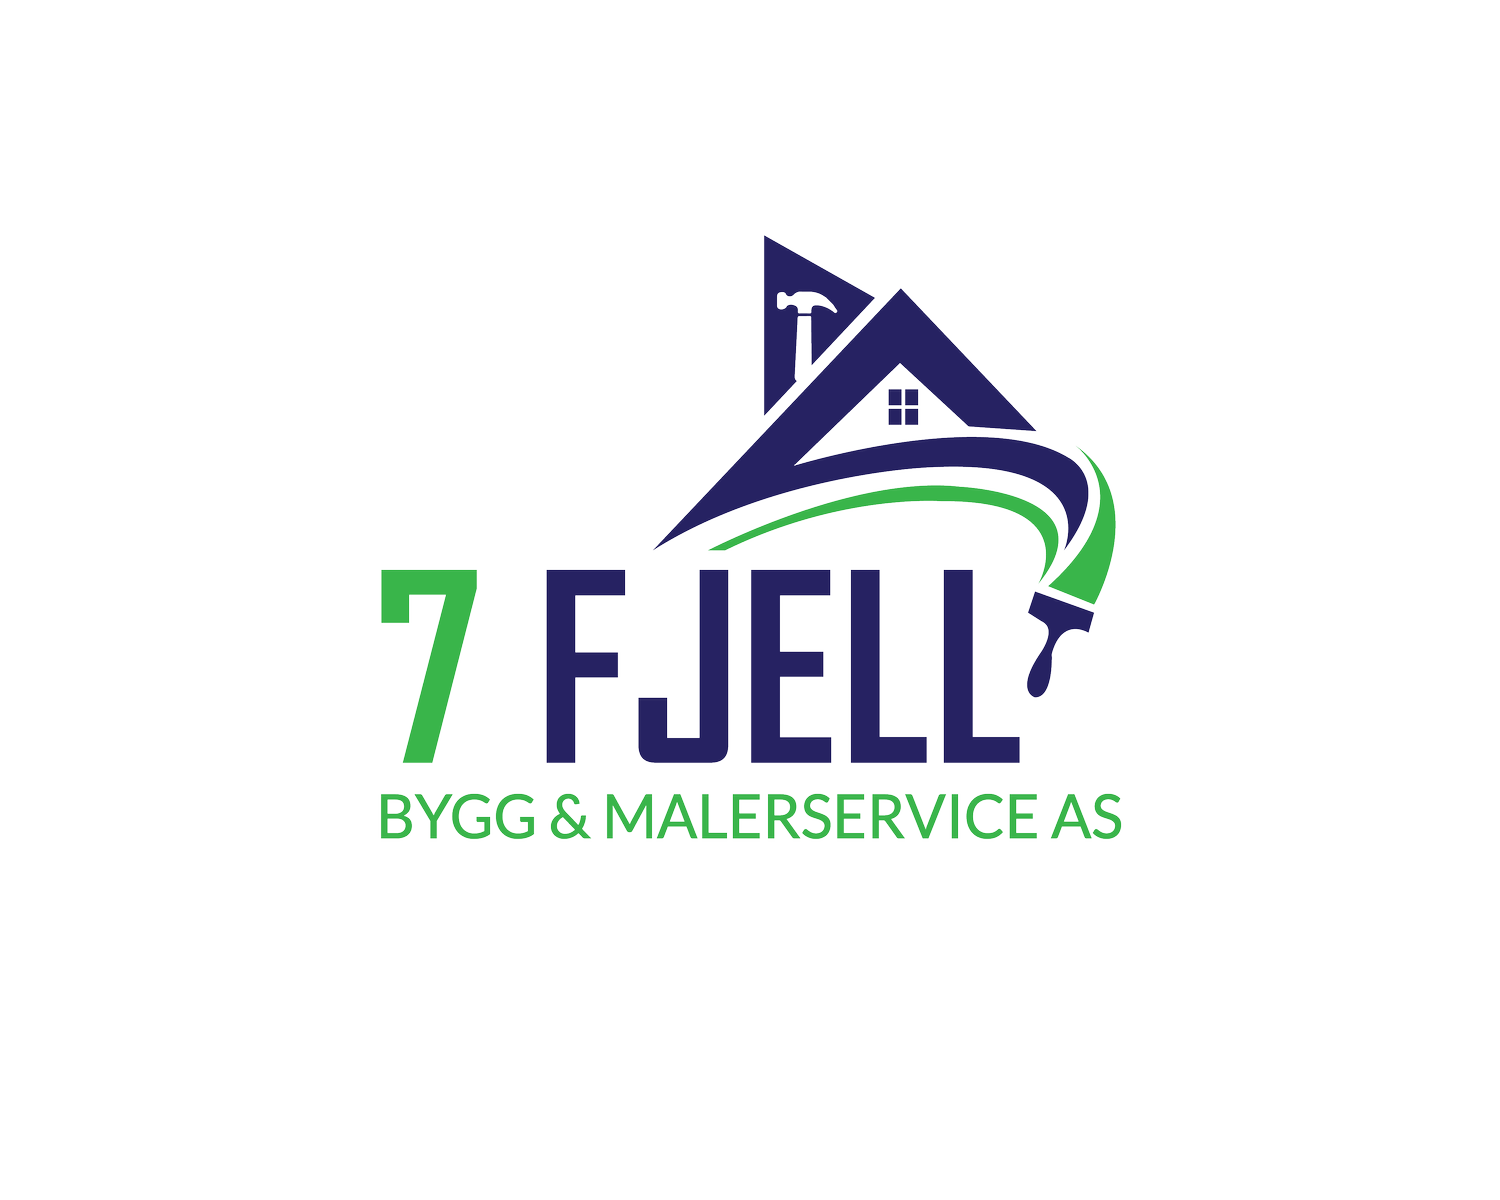 7Fjell Byggservice AS